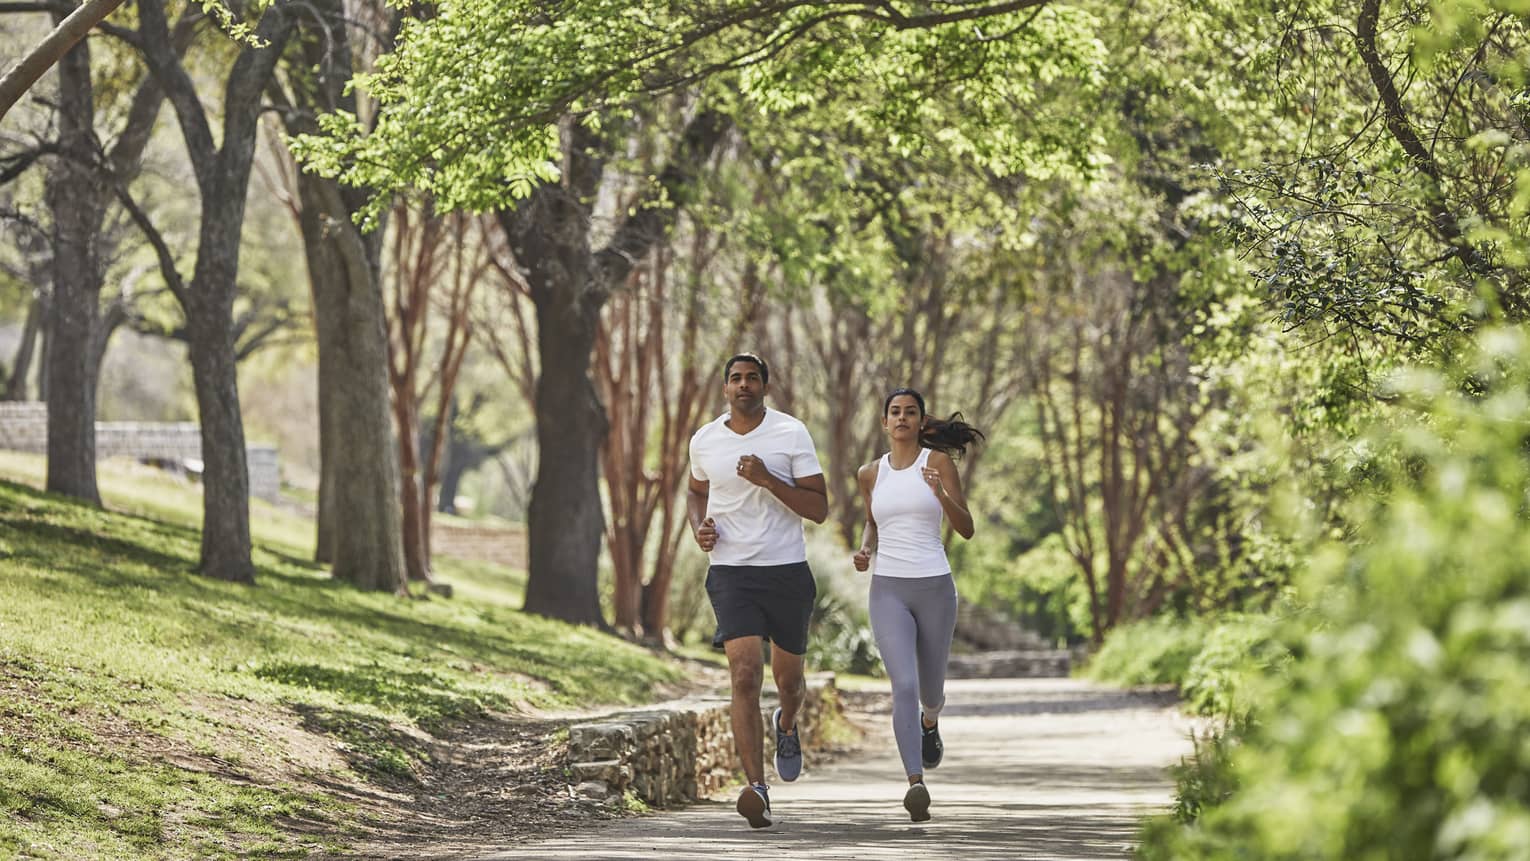 Two guests run together along a tree-lined path